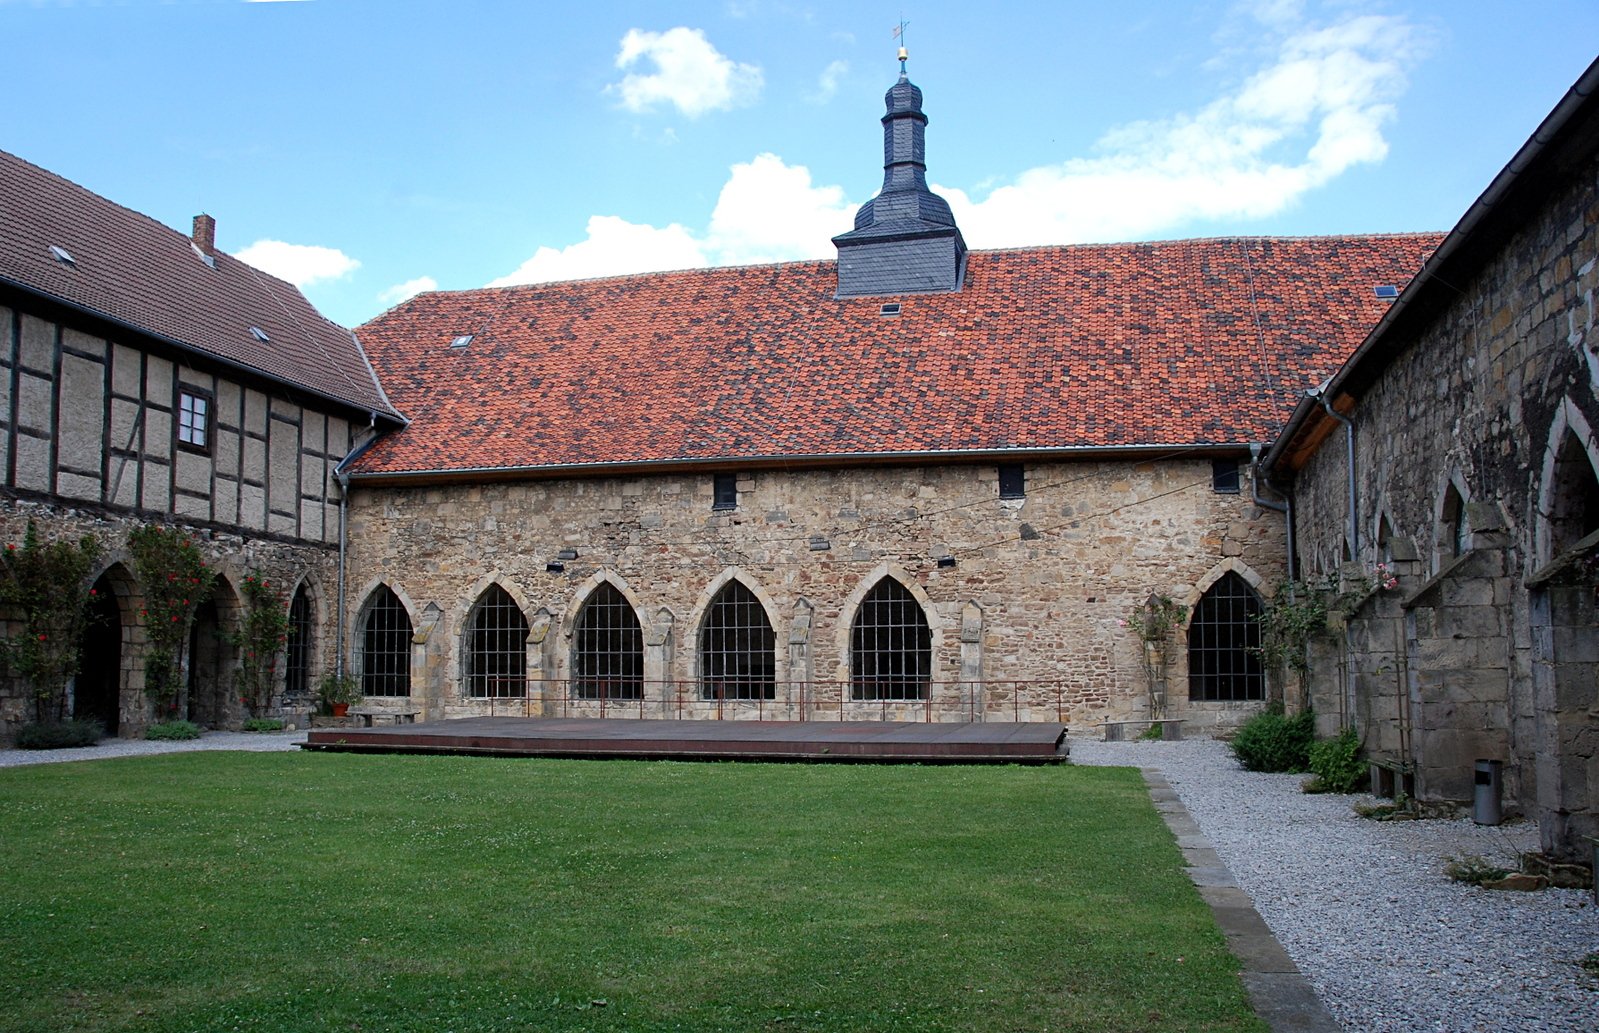 Courtyard of medieval monastery 1 Free Photo Download | FreeImages